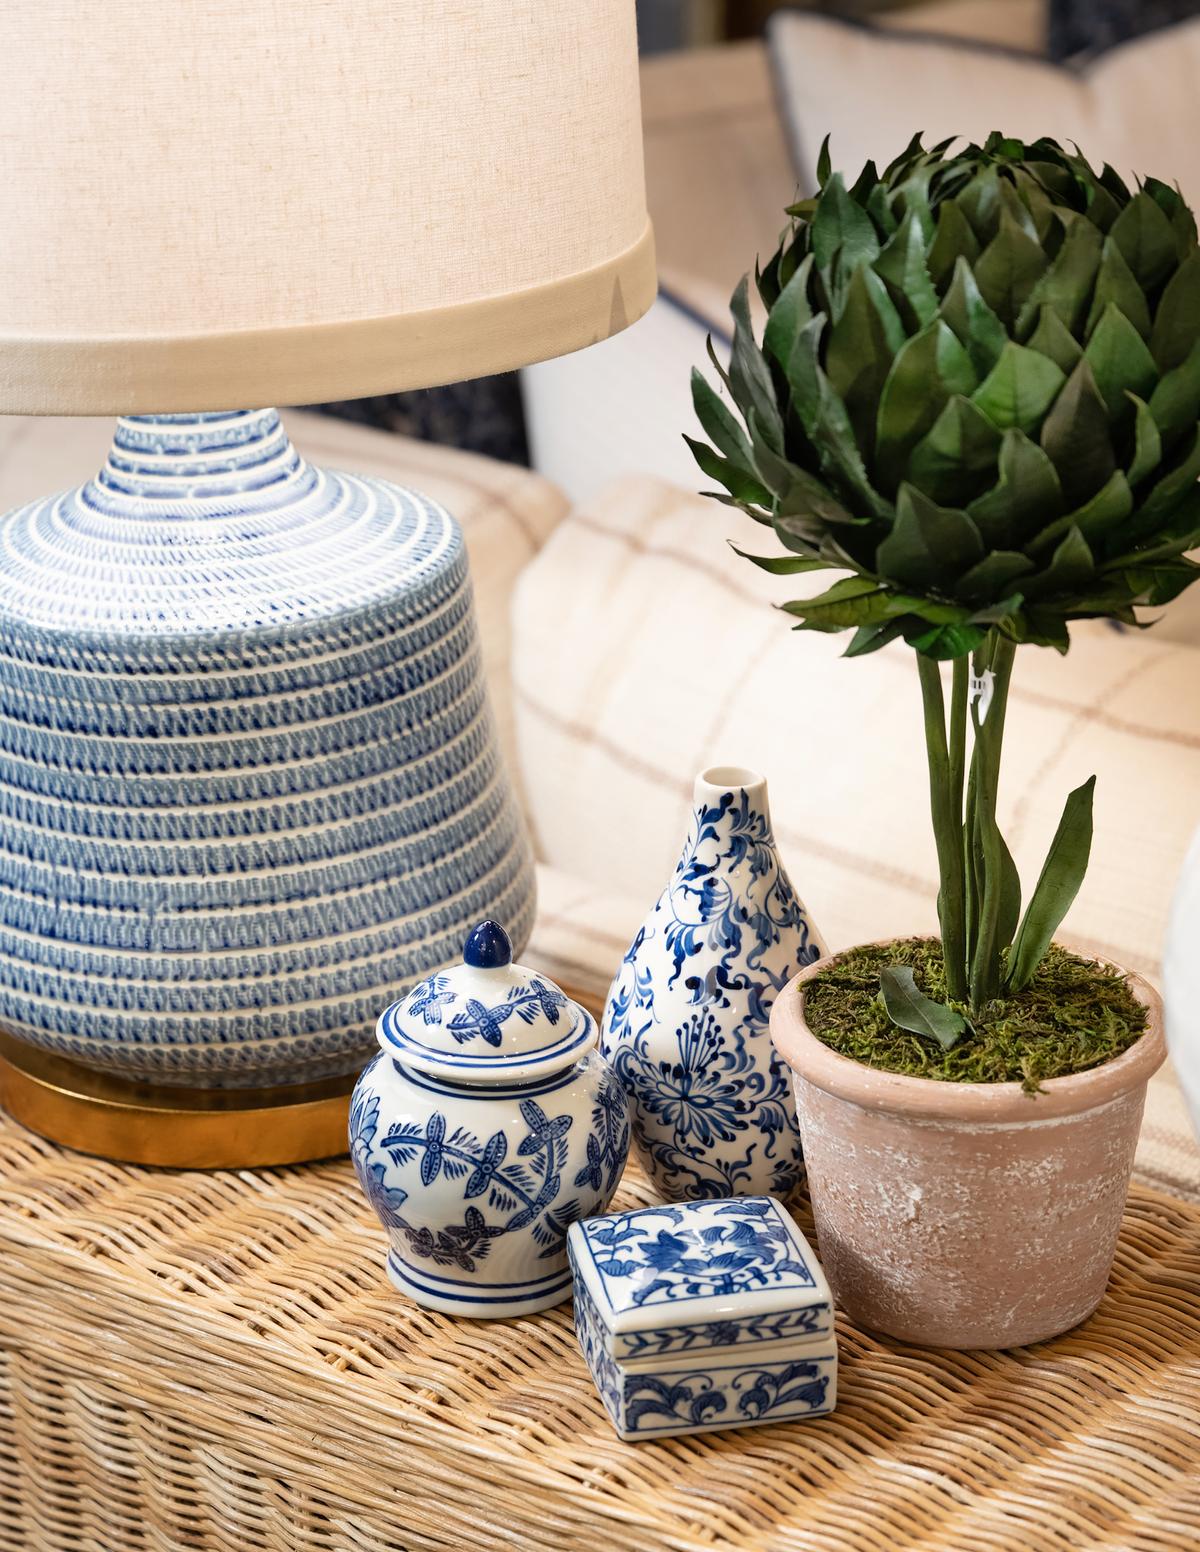 Small blue and white trinket boxes add new traditional elegance to a console table. (Handout/TNS)